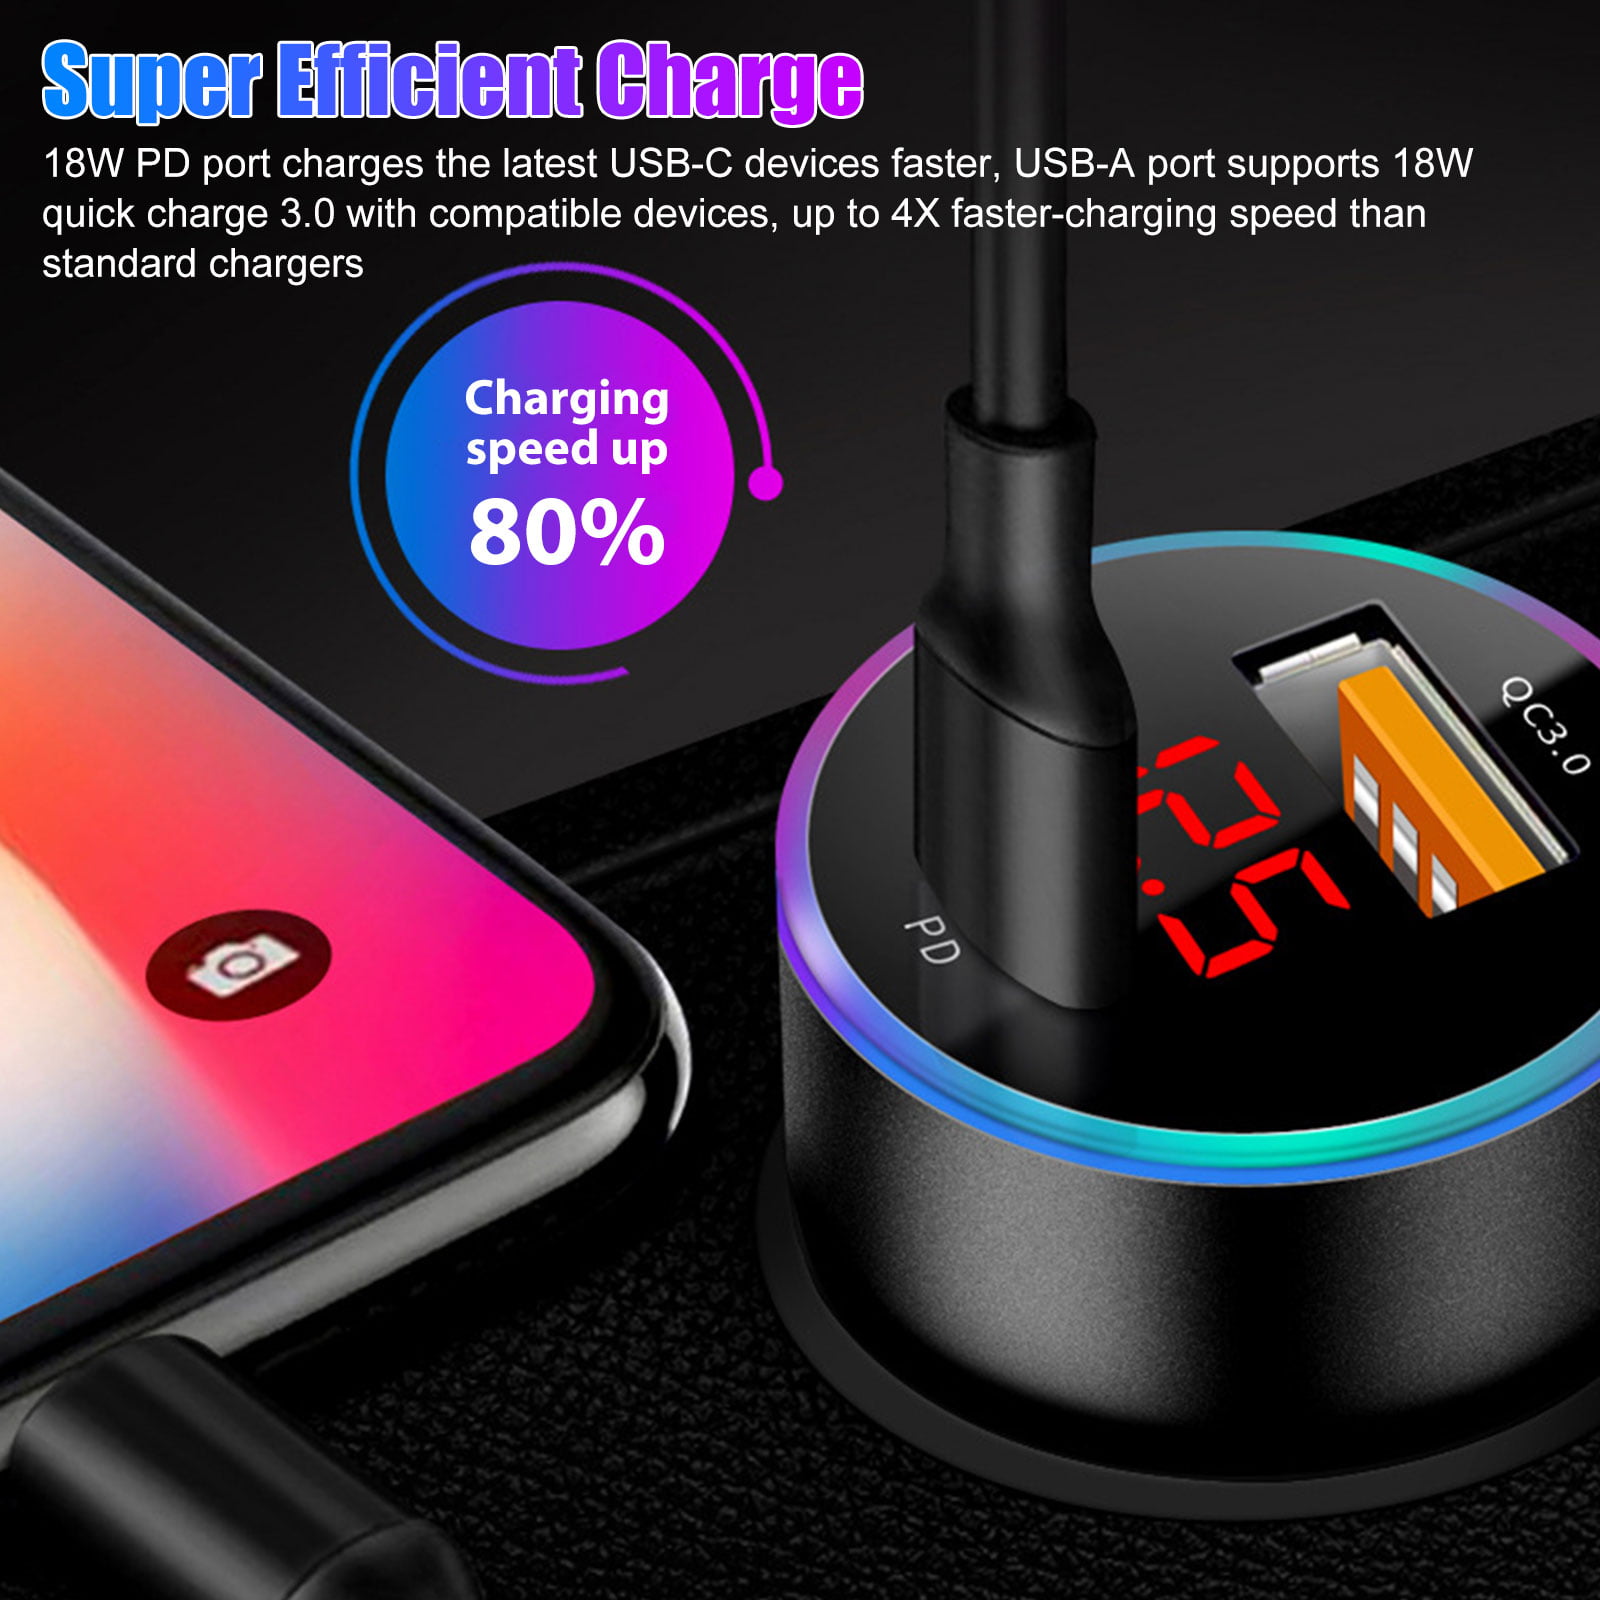 MICTUNING 36W Fast PD USB-C Car Charger with USB Quick Charge 3.0 and Type C Charger Socket with LED Digital Voltmeter Compatible with iPhone iPad Pixel Samsung 